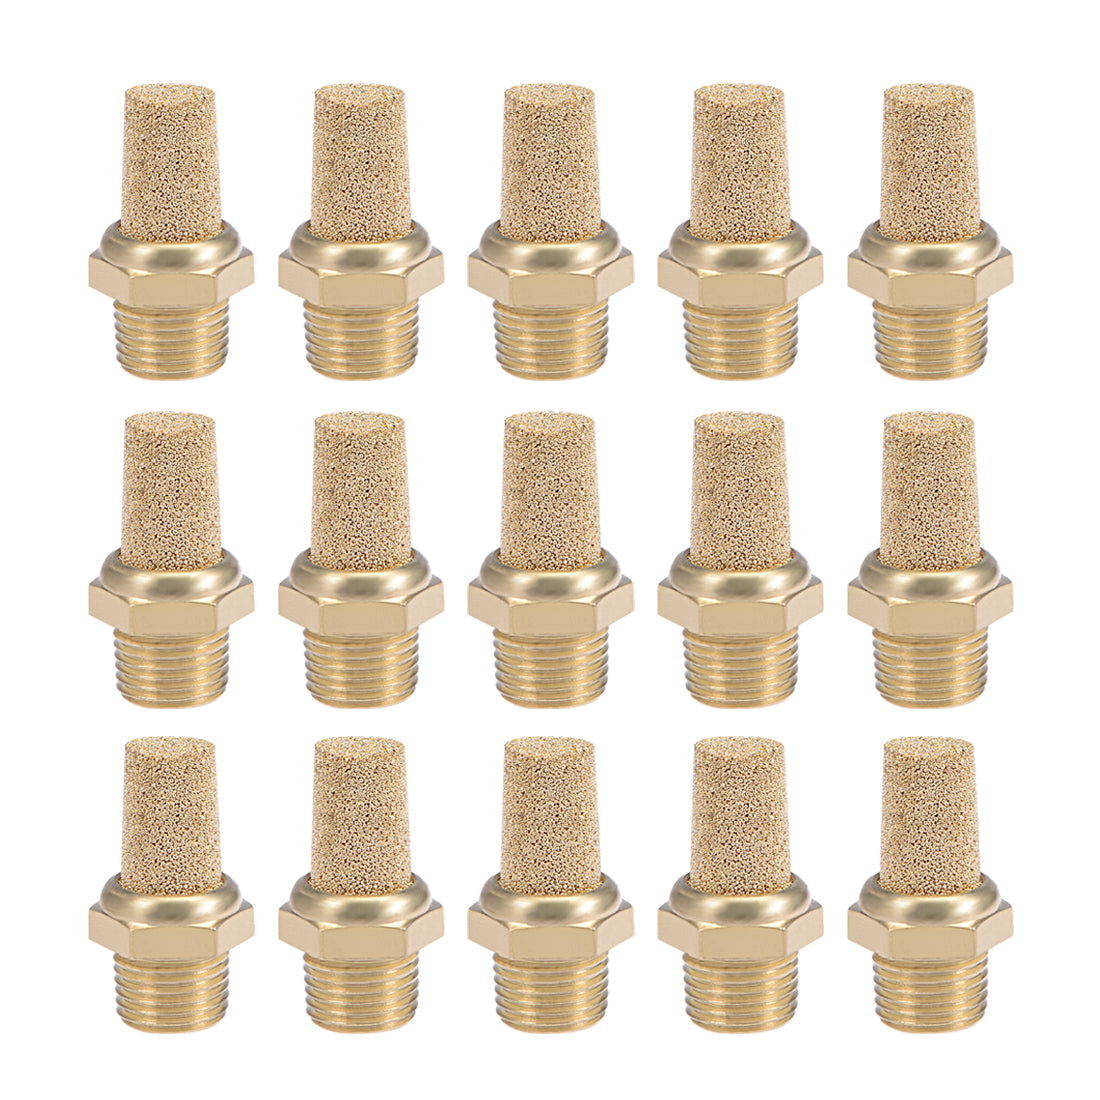 uxcell Uxcell 1/8 PT Sintered Bronze Exhaust Muffler with Brass Body Protruding 15pcs